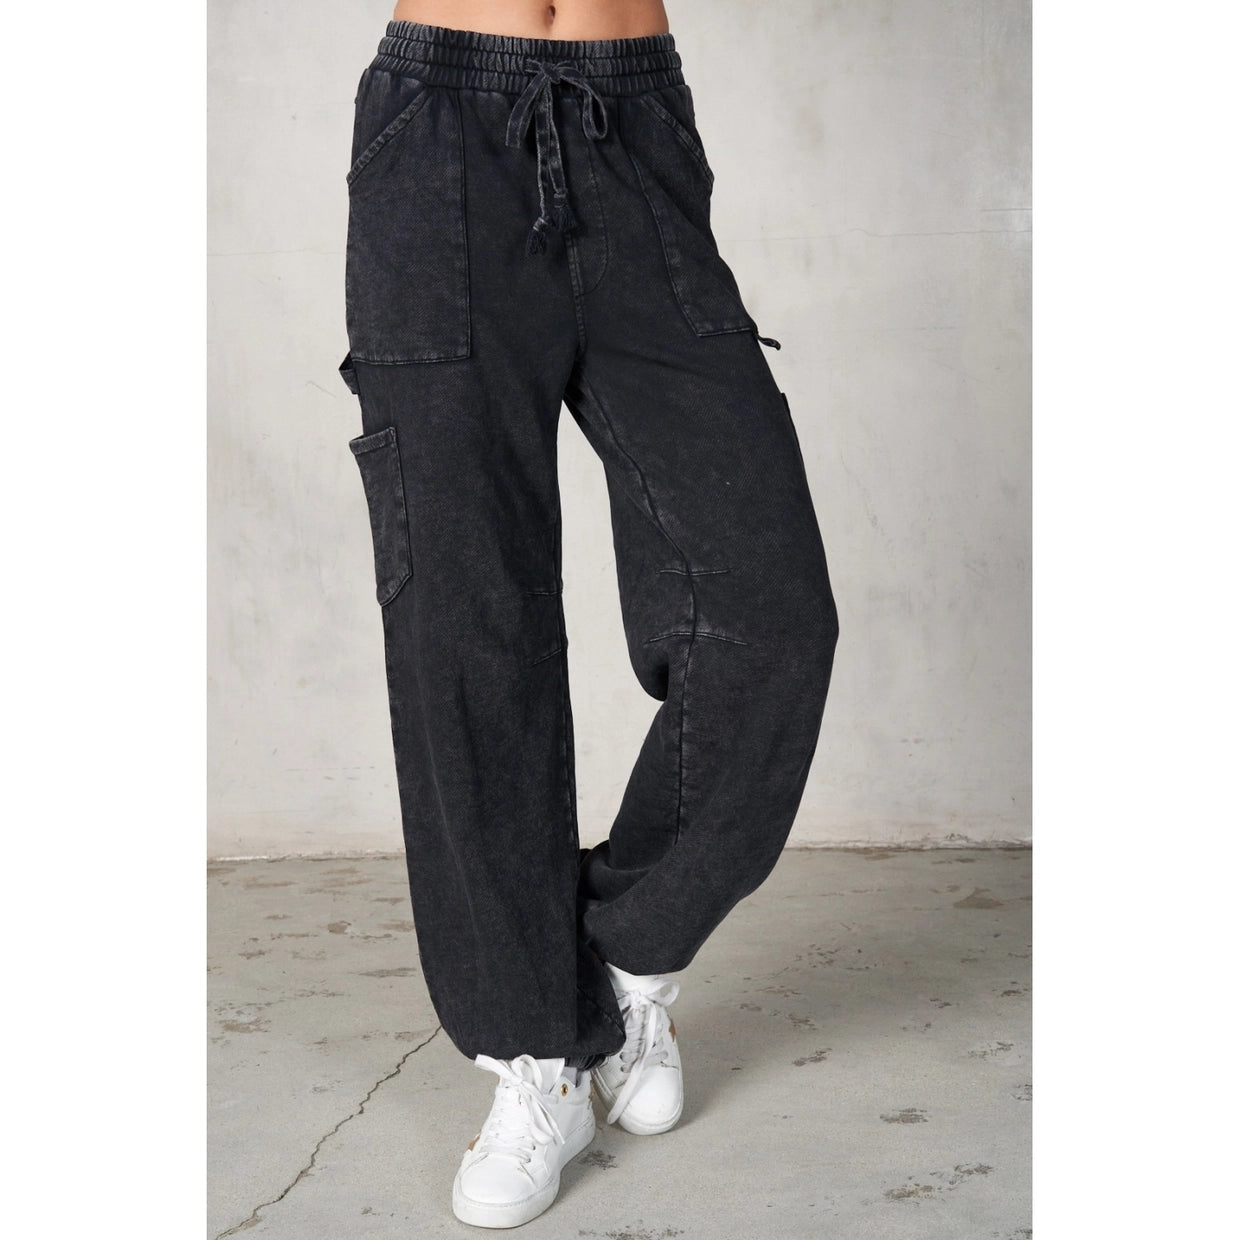 LaLaMia Garment Washed Terry Cargo Sweatpants